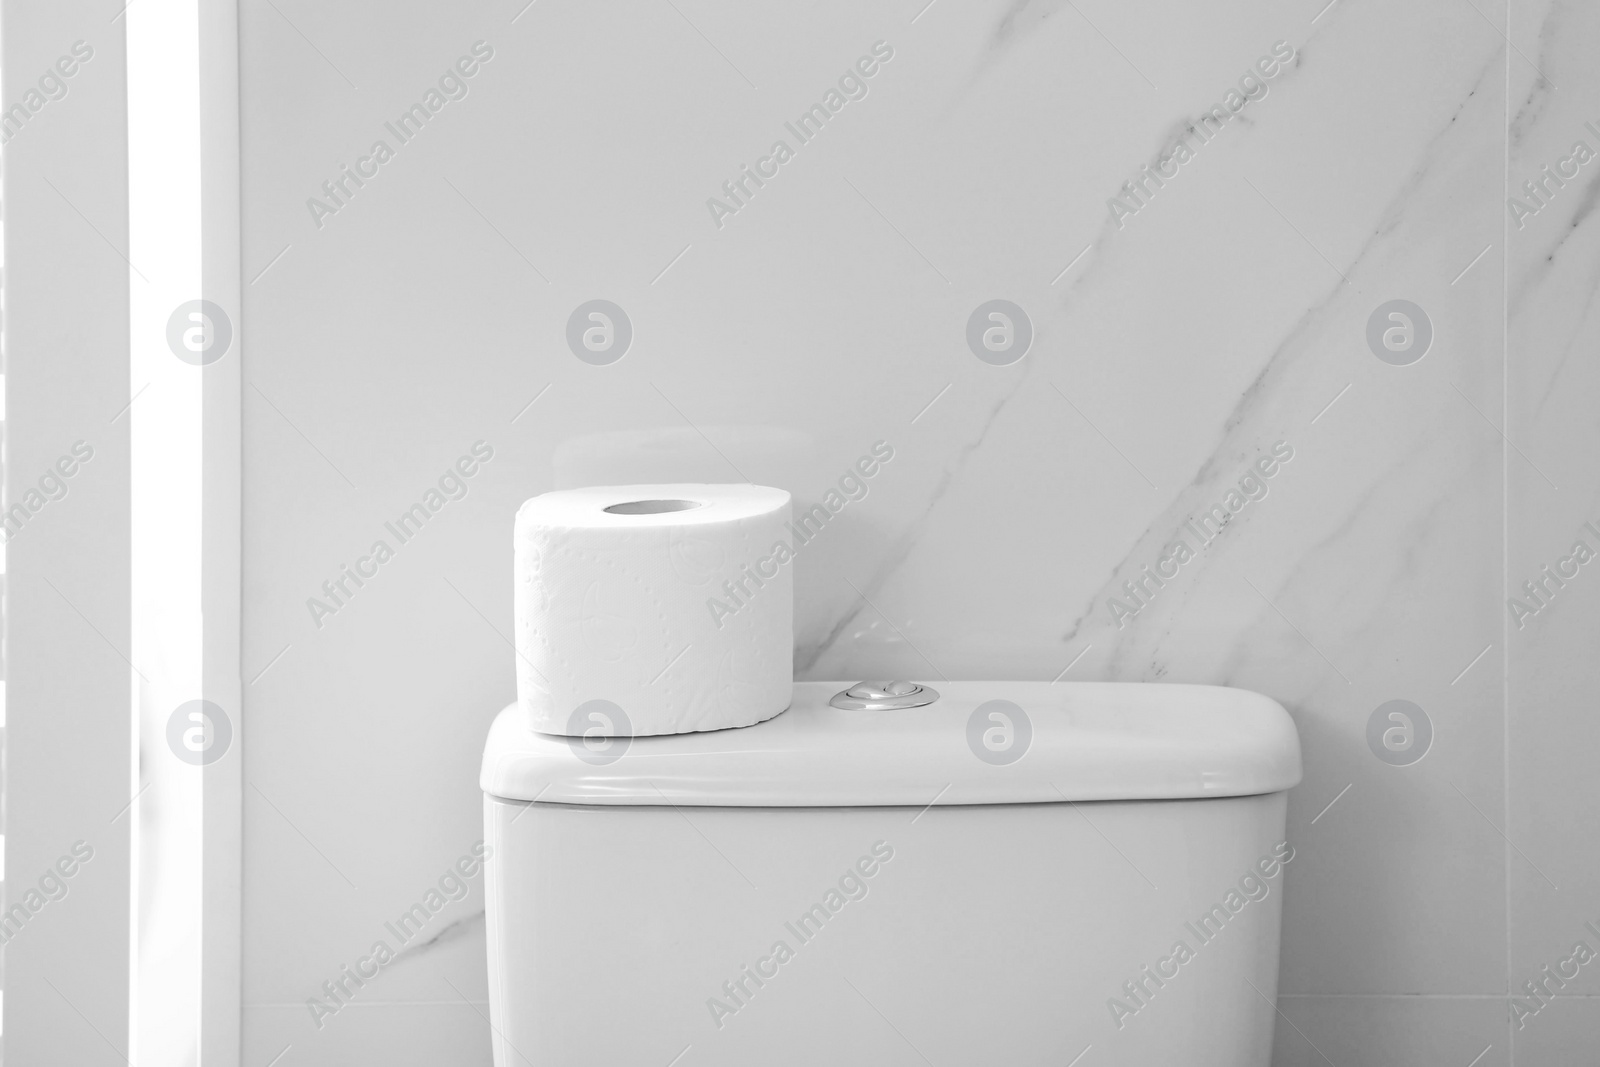 Photo of Paper roll on tank of toilet bowl in bathroom